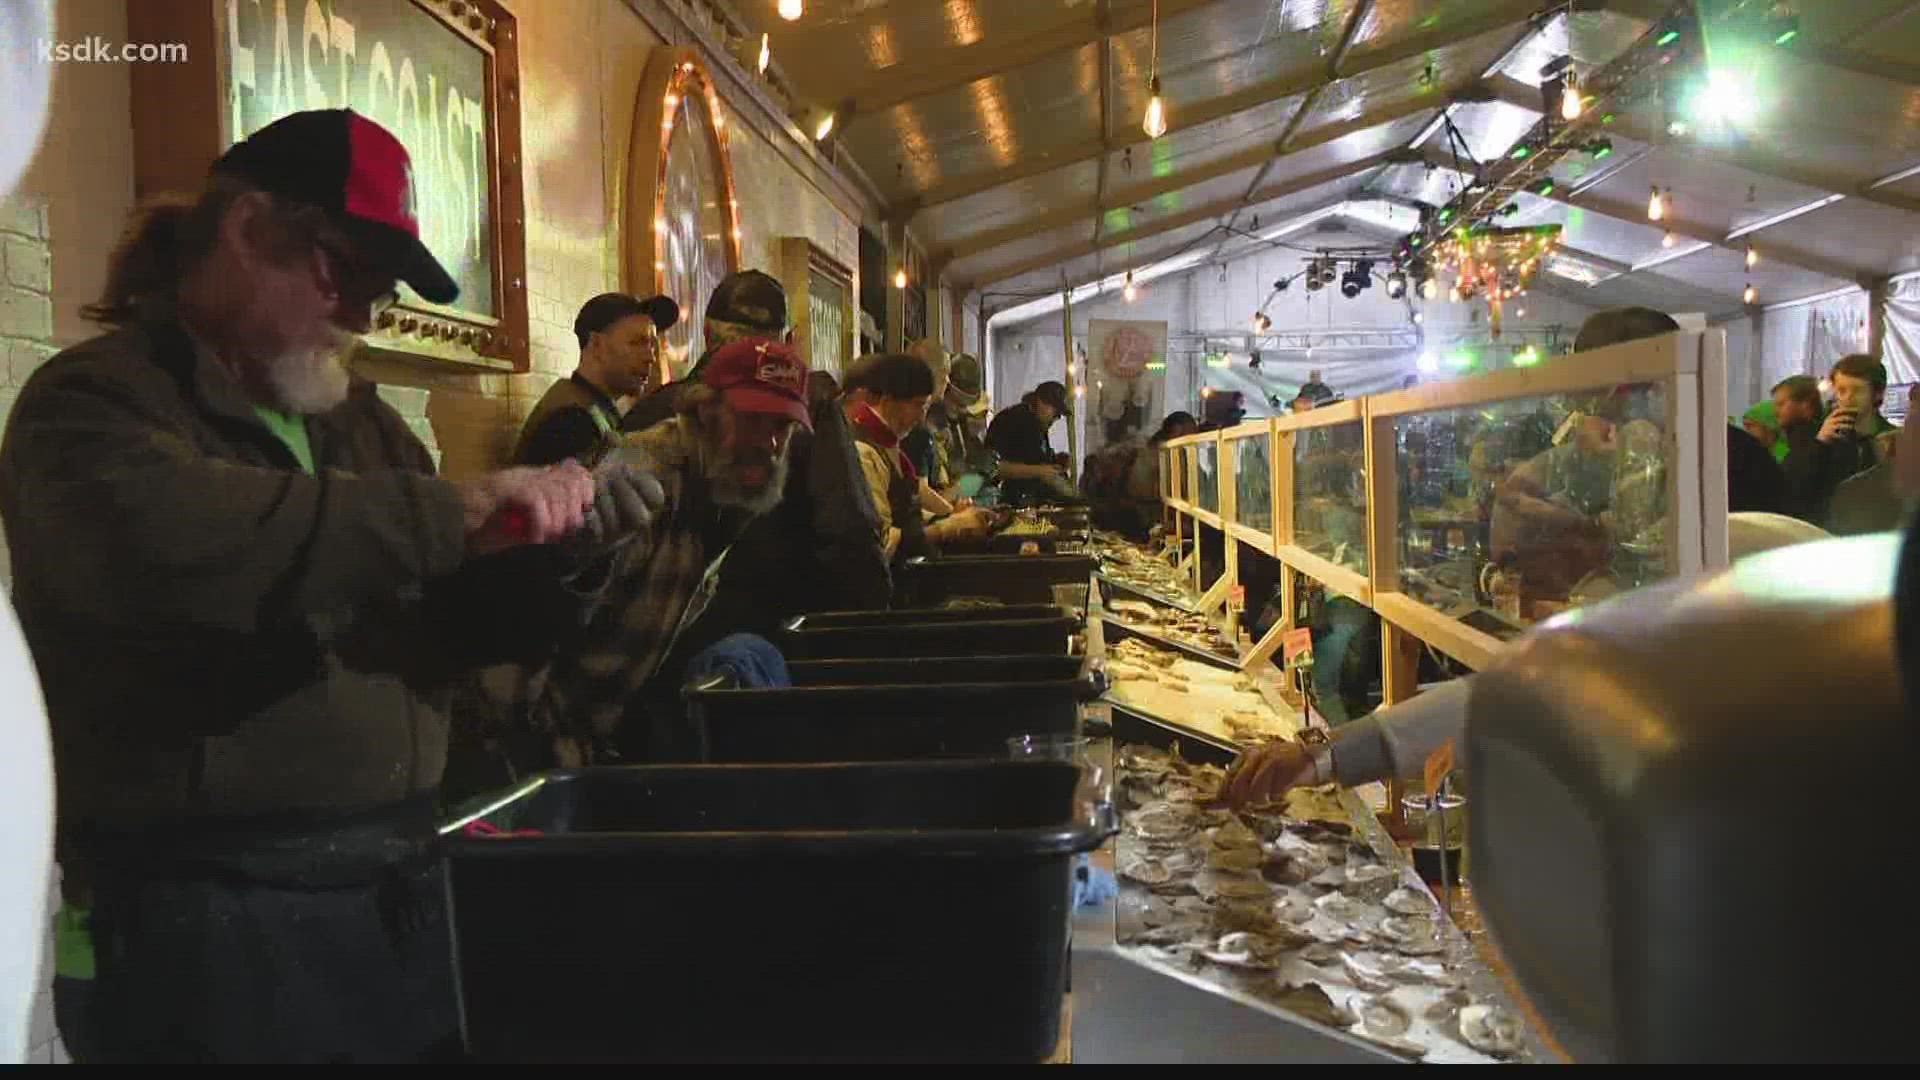 Organizers are flying in 80,000 oysters overnight. is The event is the largest of its kind in the Midwest region.